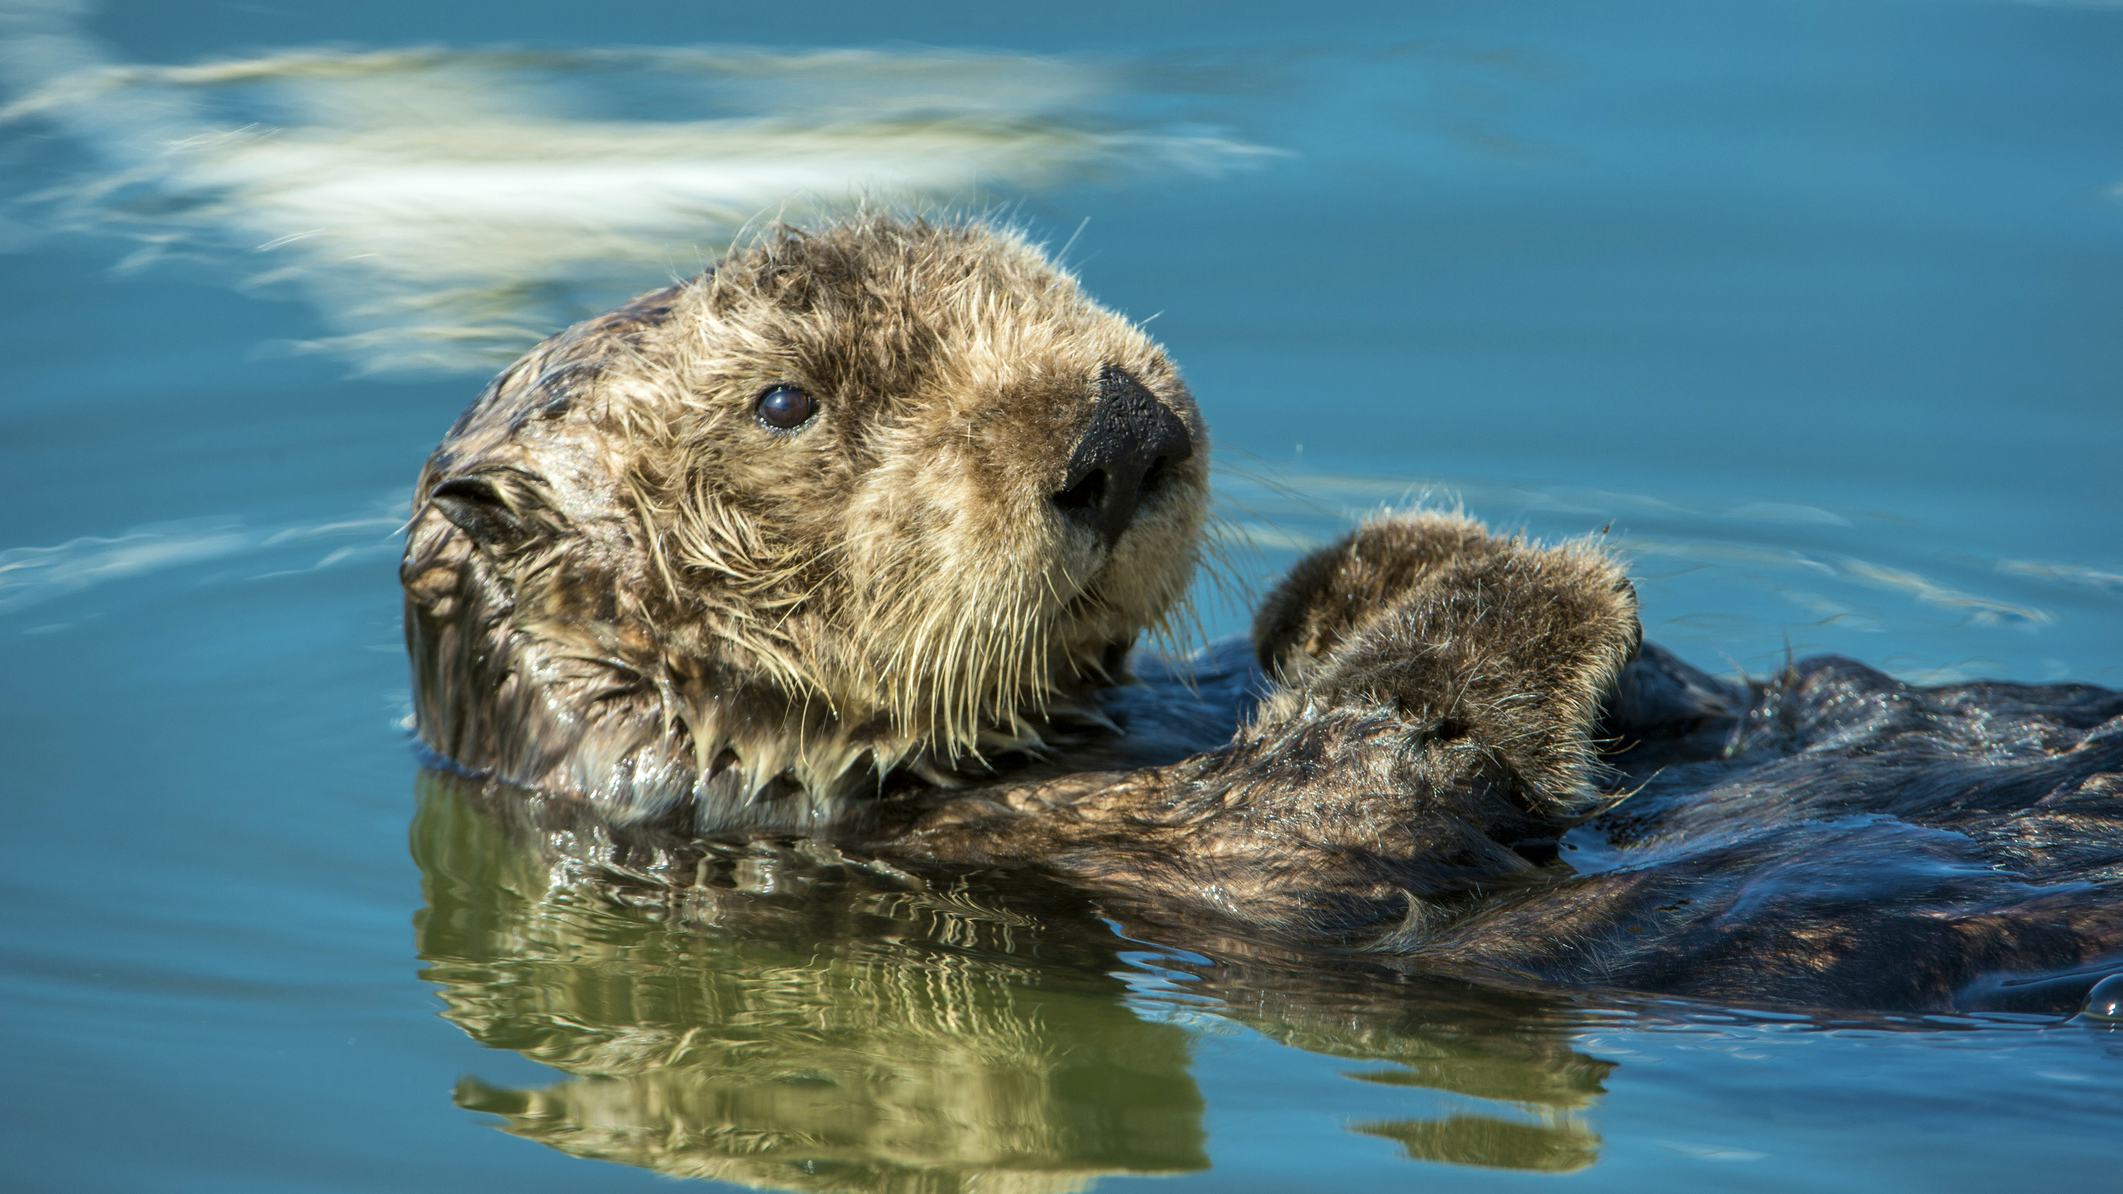 Newsela - Sea otters are one of few animals that use tools like humans do